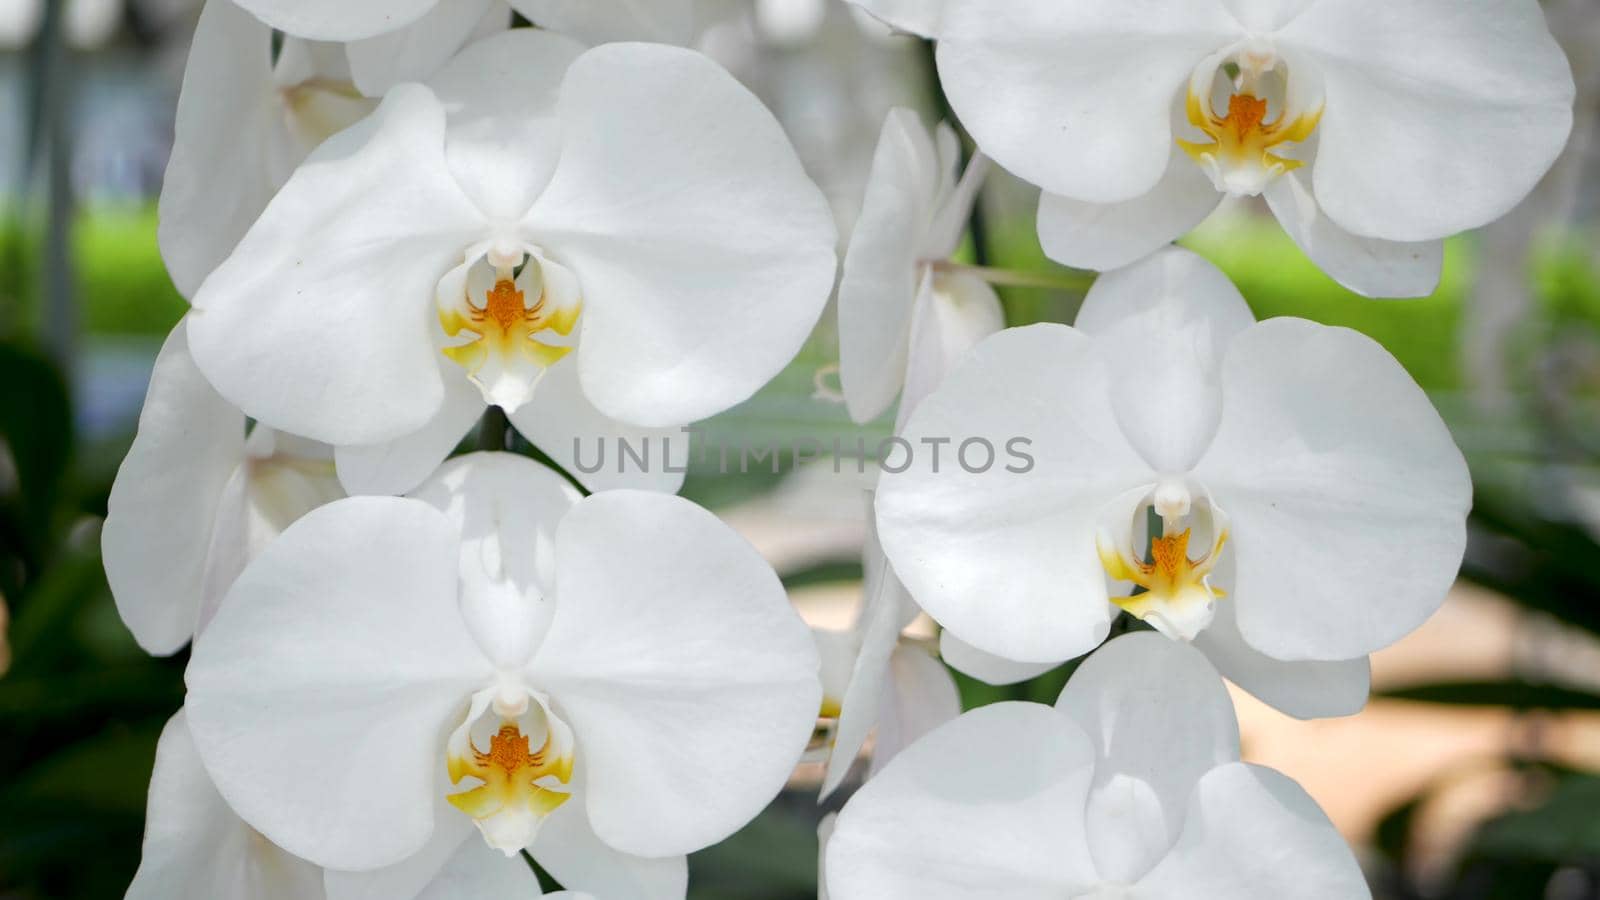 Delicate white elegant orchid flowers with yellow centers in sunlight. Close up macro of tropical petals in spring garden. Abstract natural exotic background with copy space. Floral blossom pattern